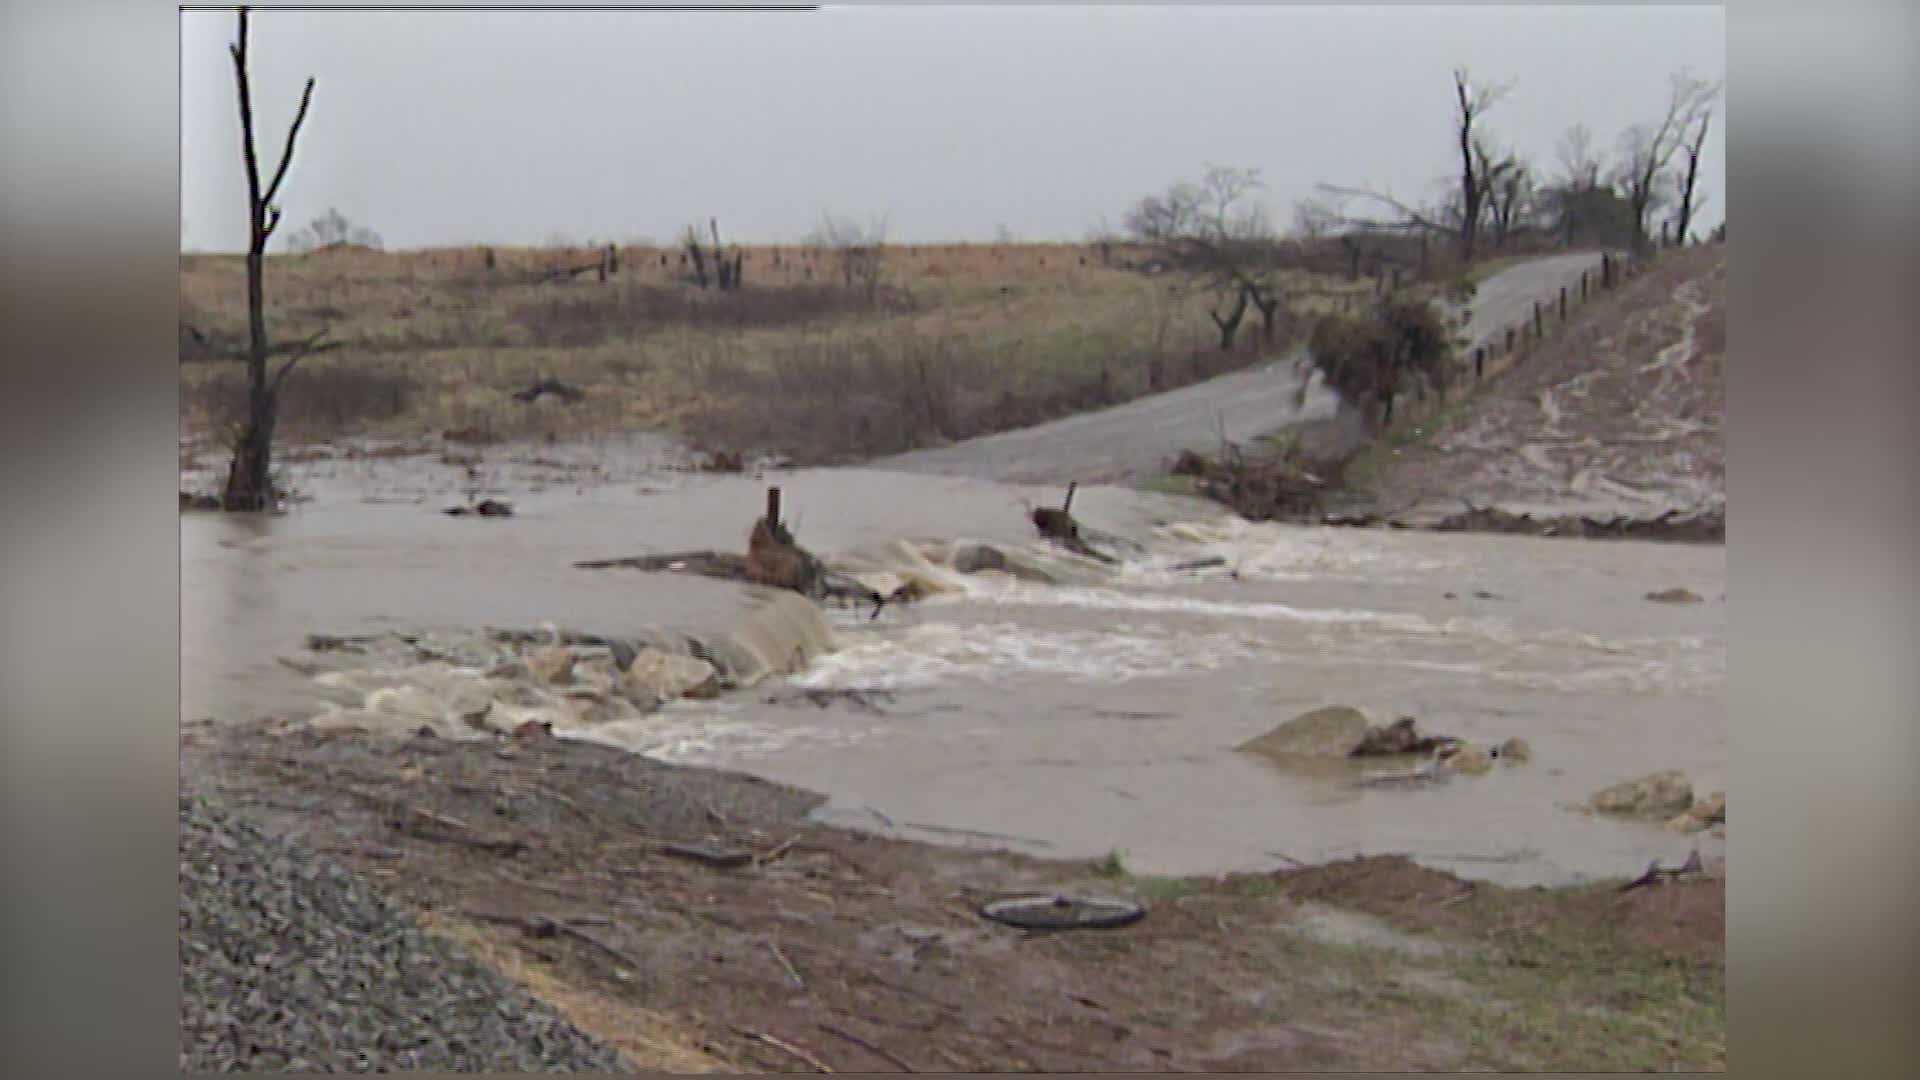 ARCHIVES: 1 year after tornado, Zoneton residents deal with flooding